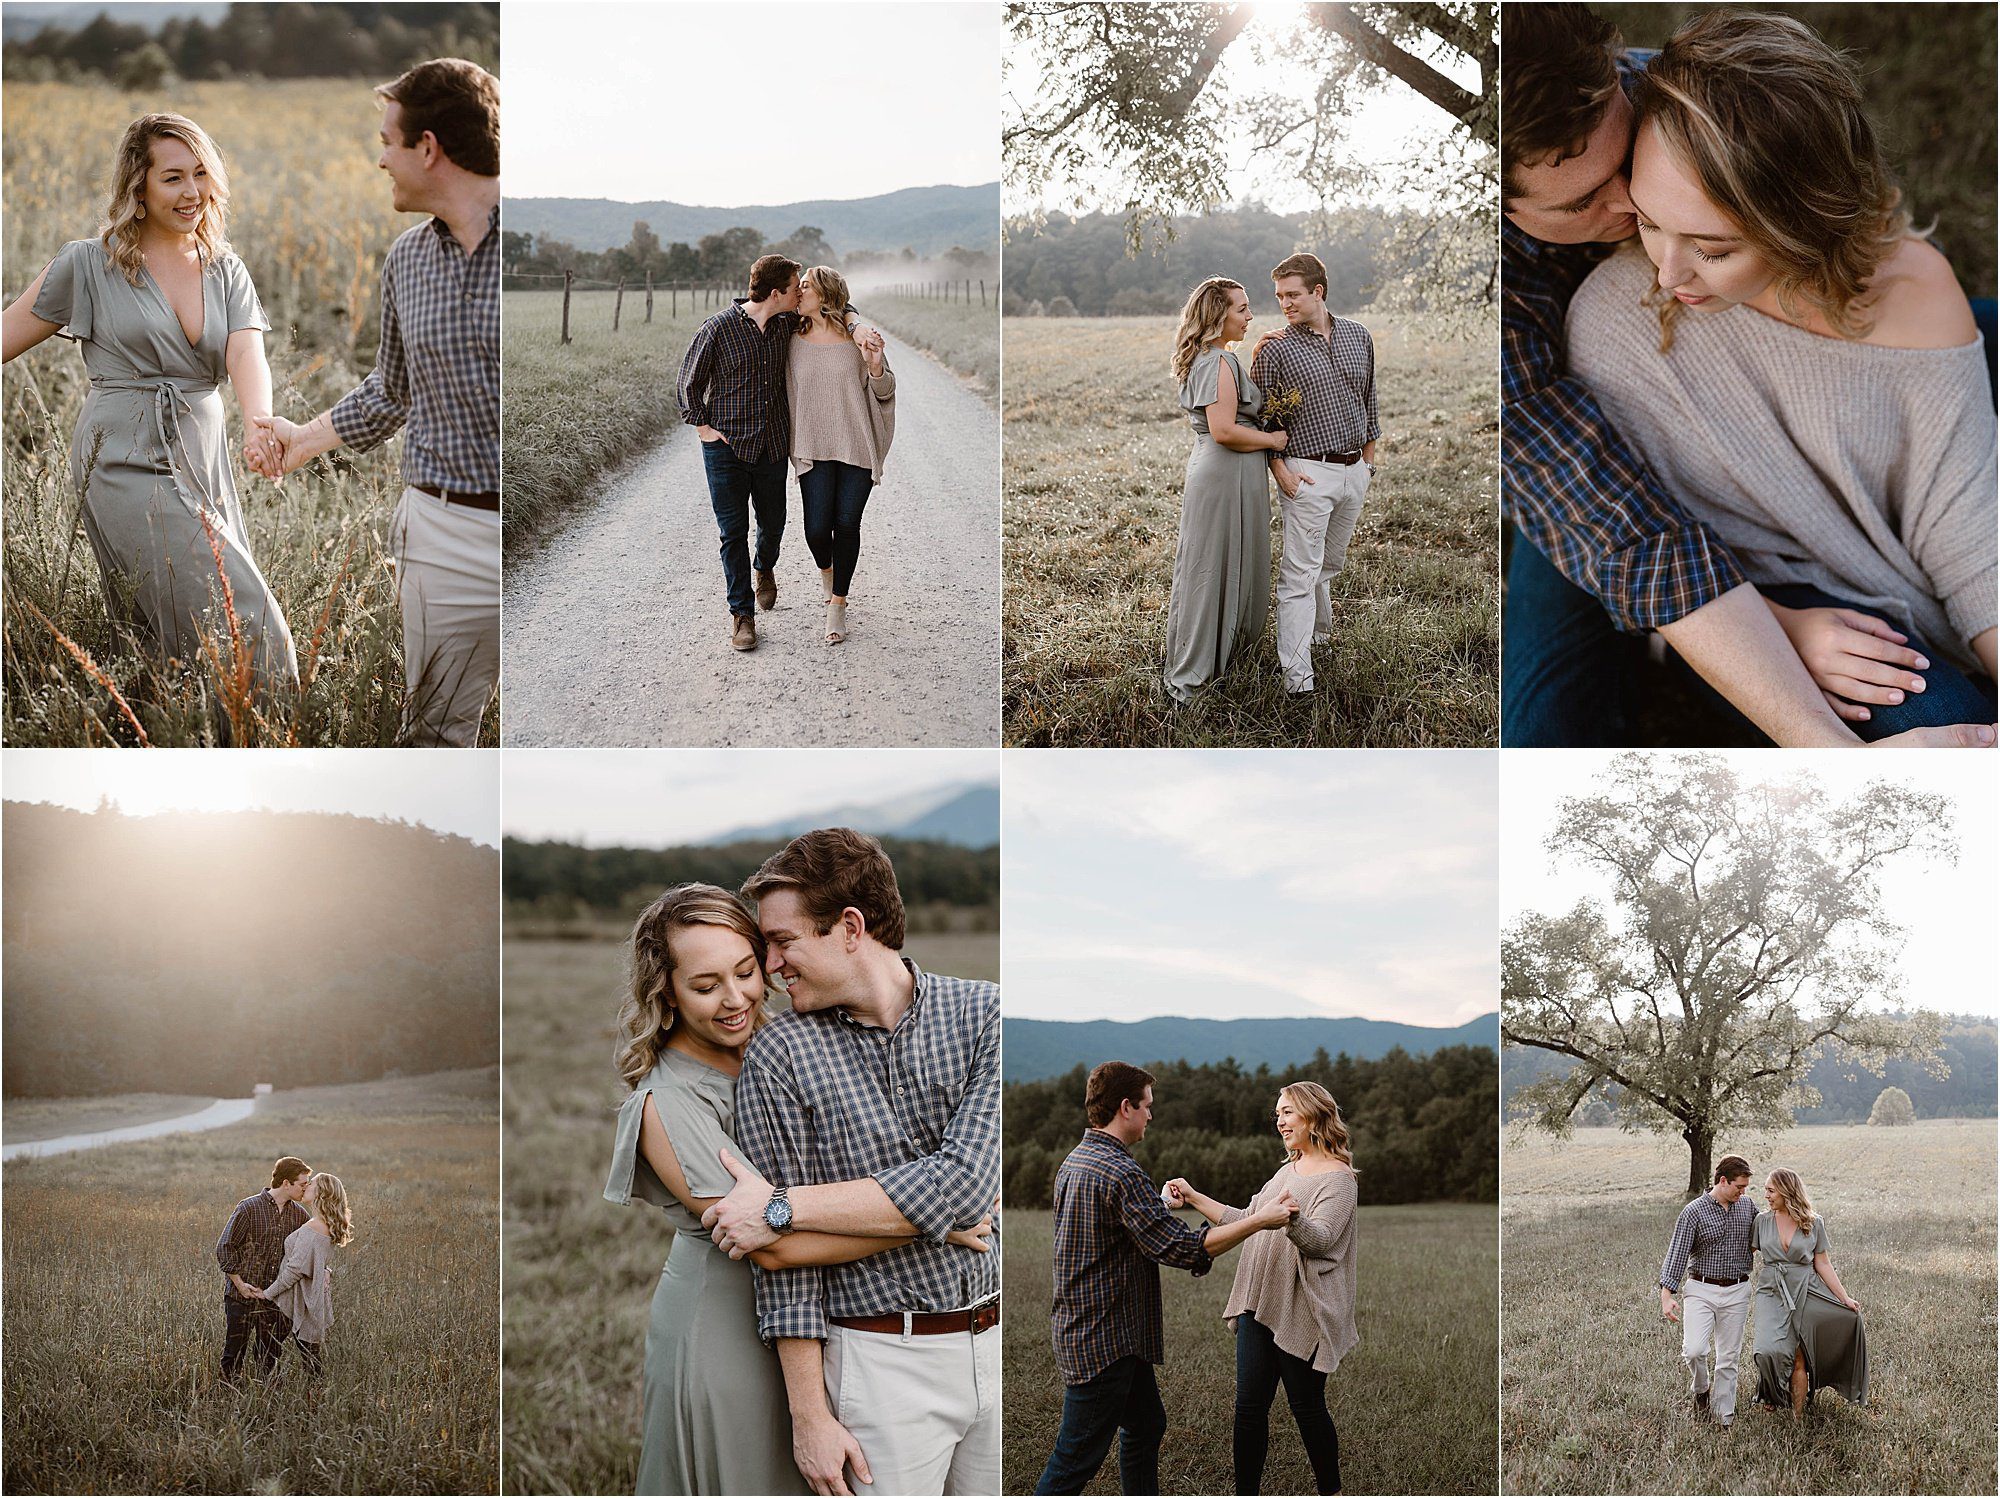 Cades Cove Engagement Photos in The Great Smoky Mountain National Park